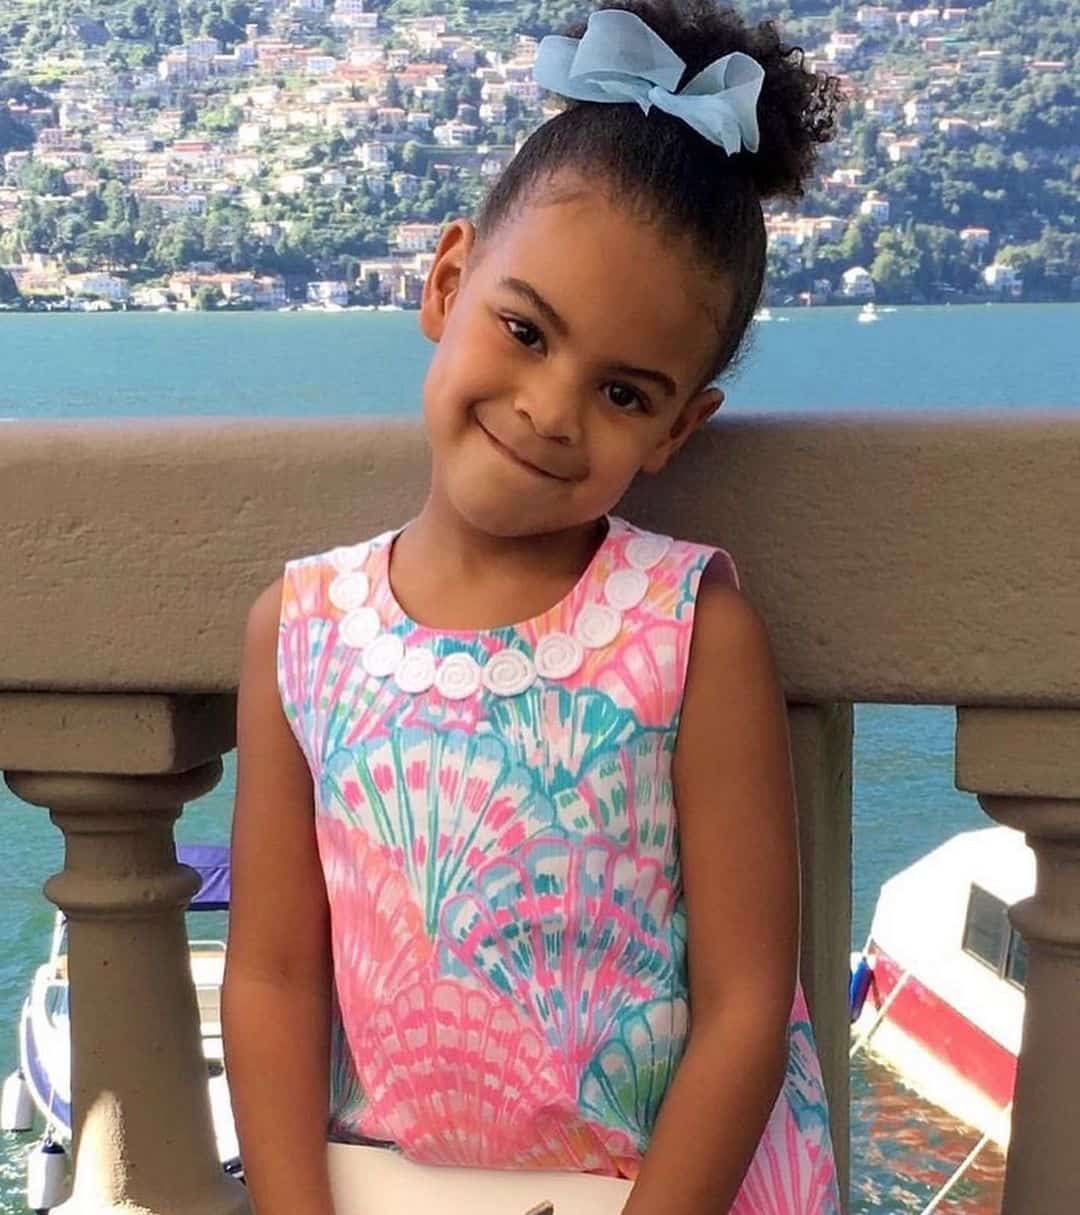 10 Adorable Pics of Blue Ivy Carter, Beyonce's Daughter Who Turn 9